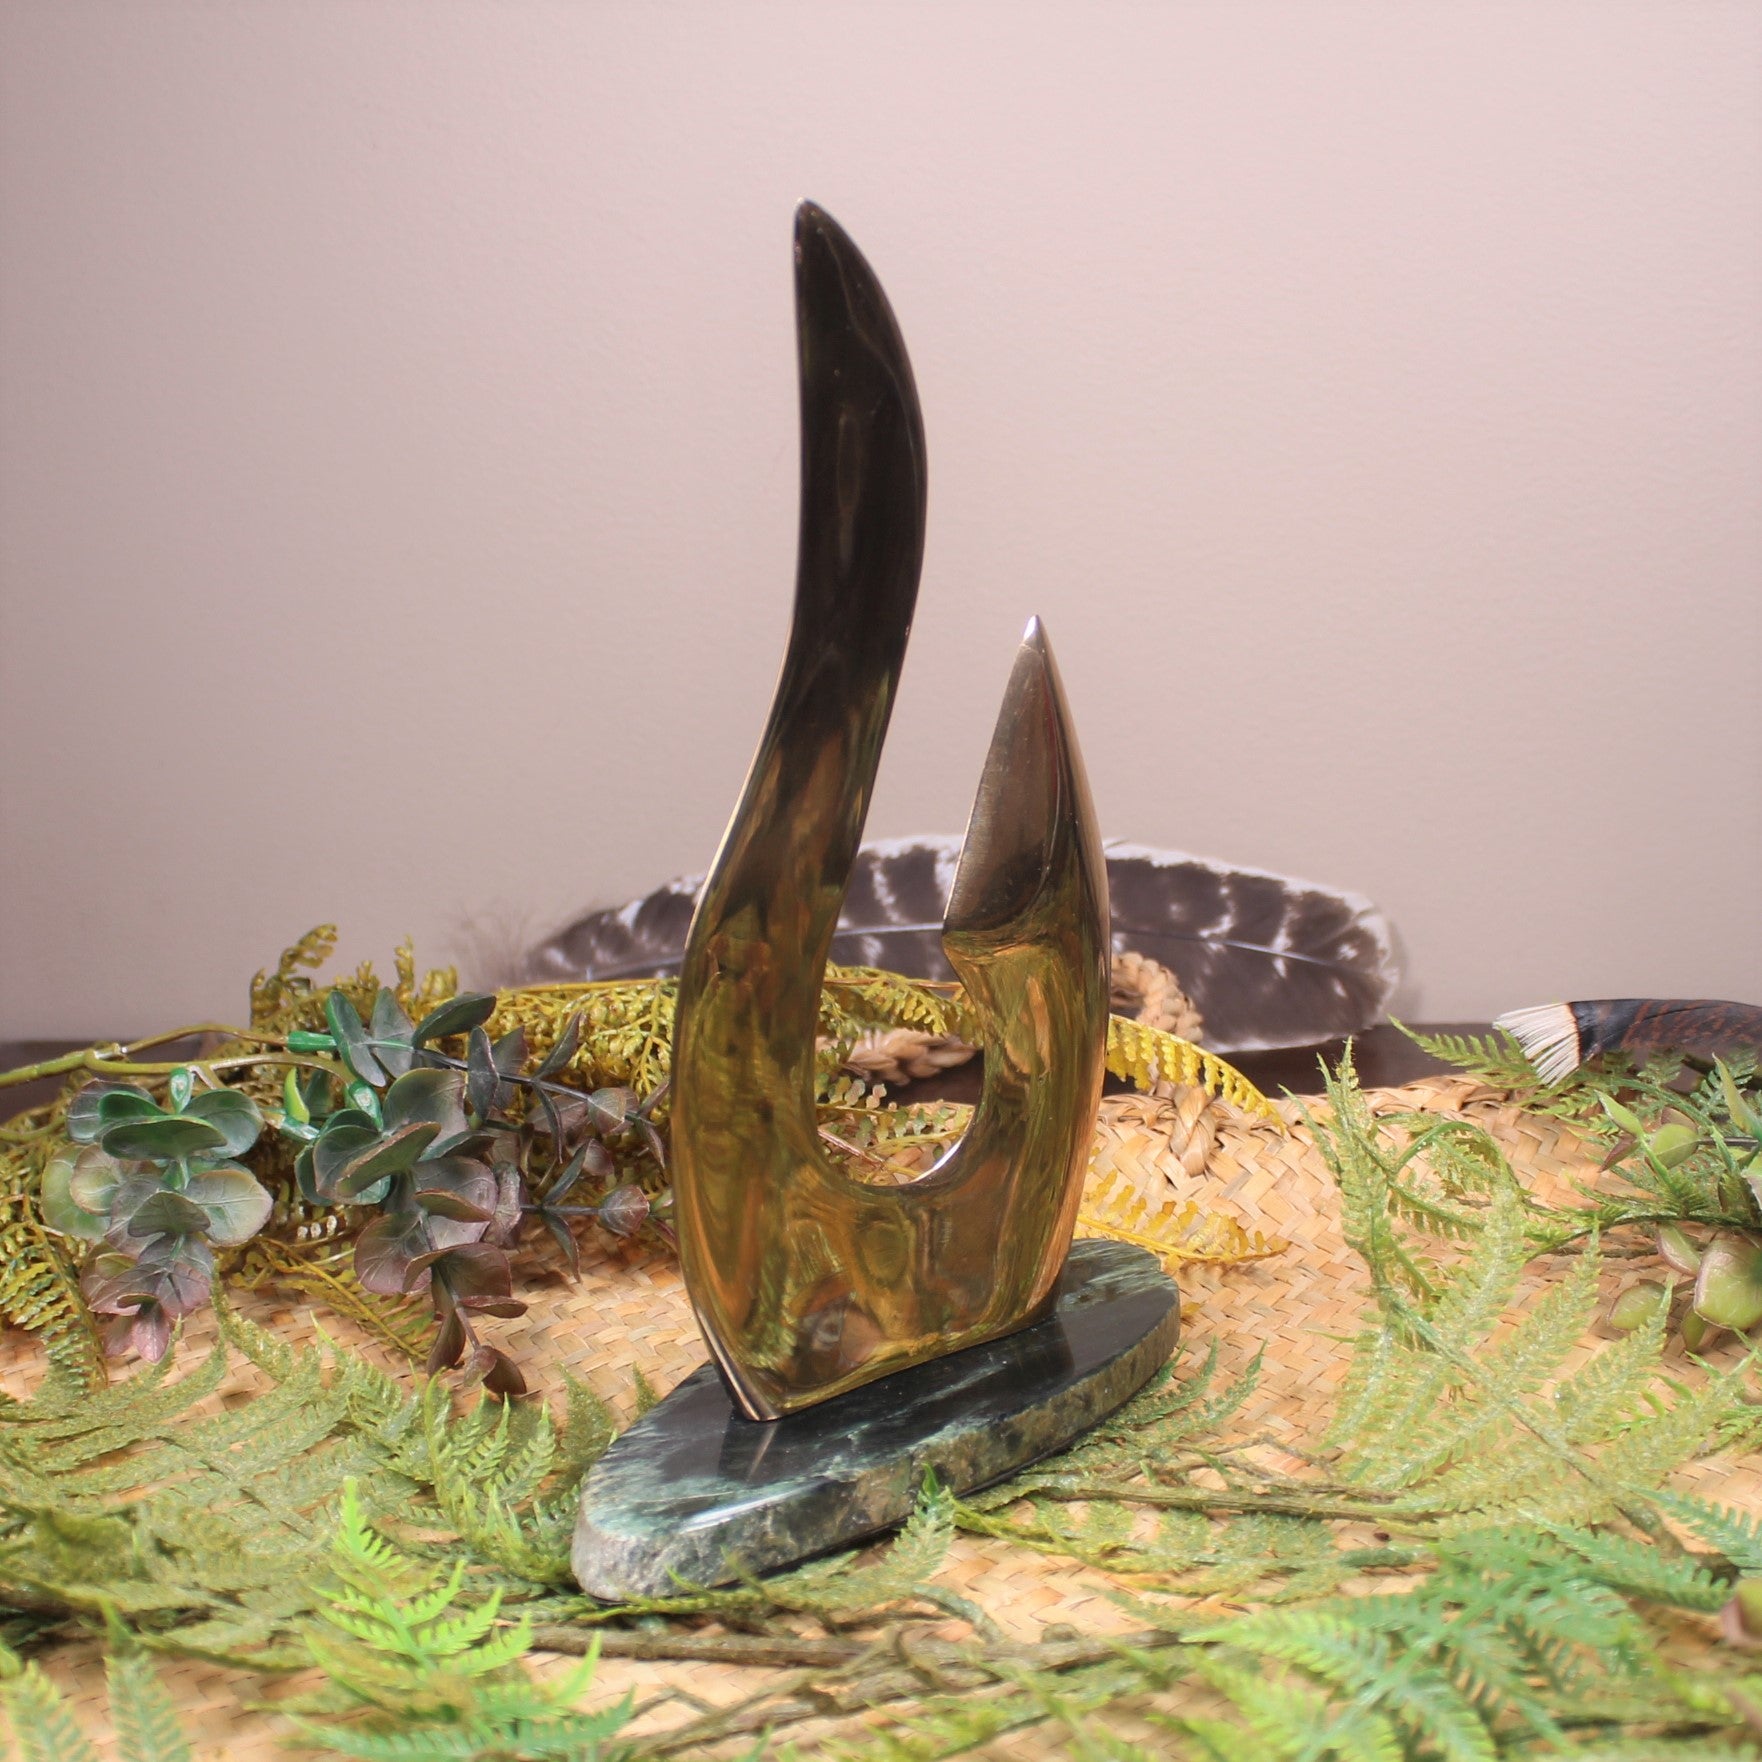 Matau or Fishhook Sculpture made from Polished Bronze